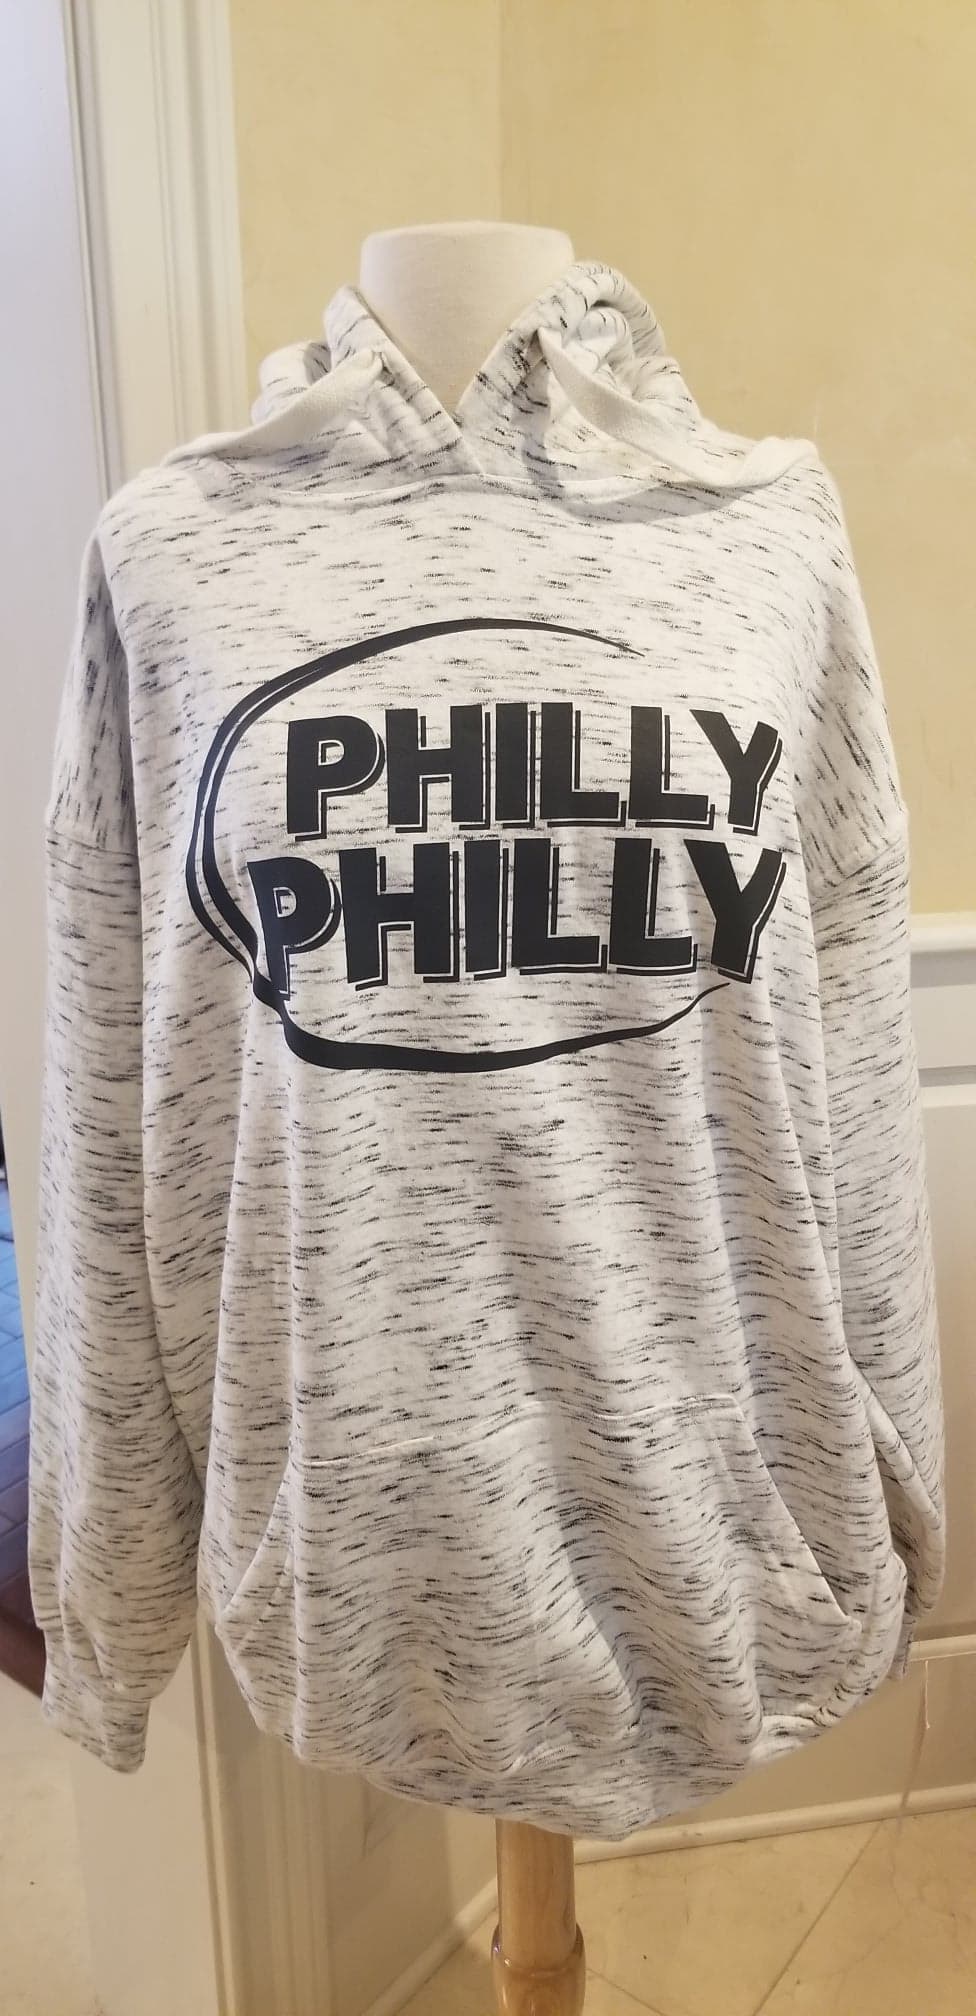 Philly Philly - White Yarn Infused Style Hoodie